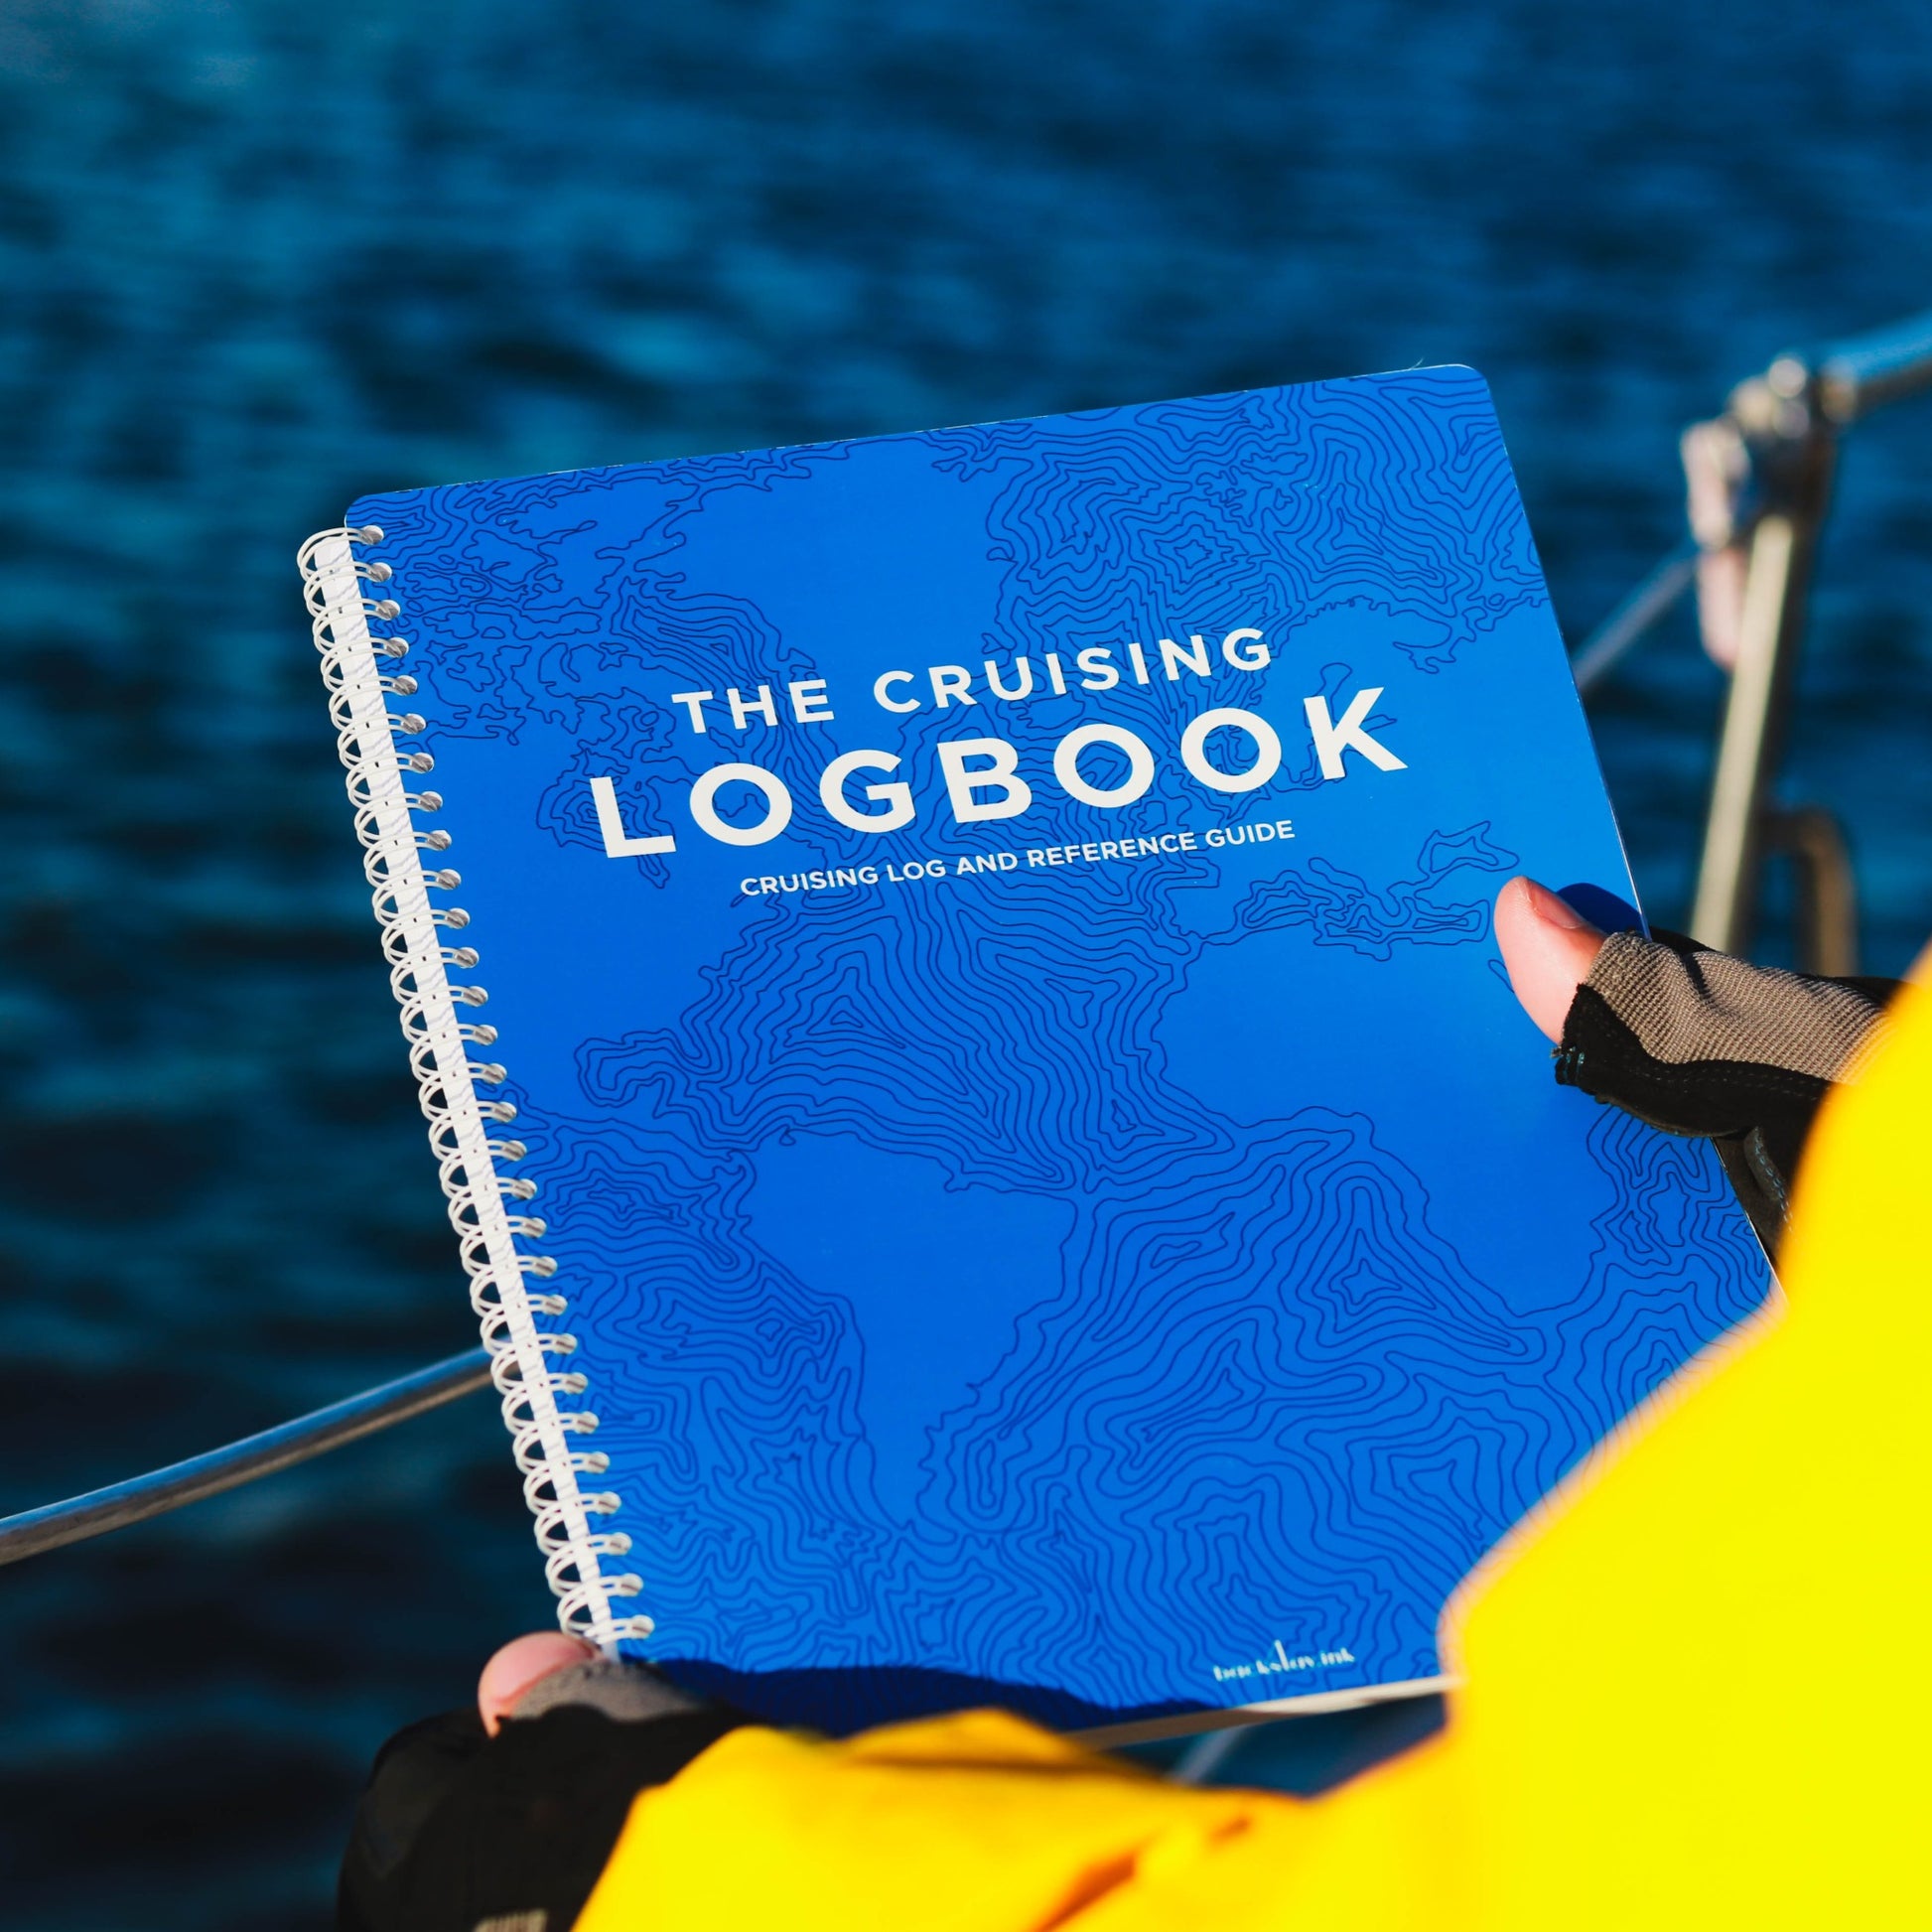 Photo: Sailing logbook with waterproof cover